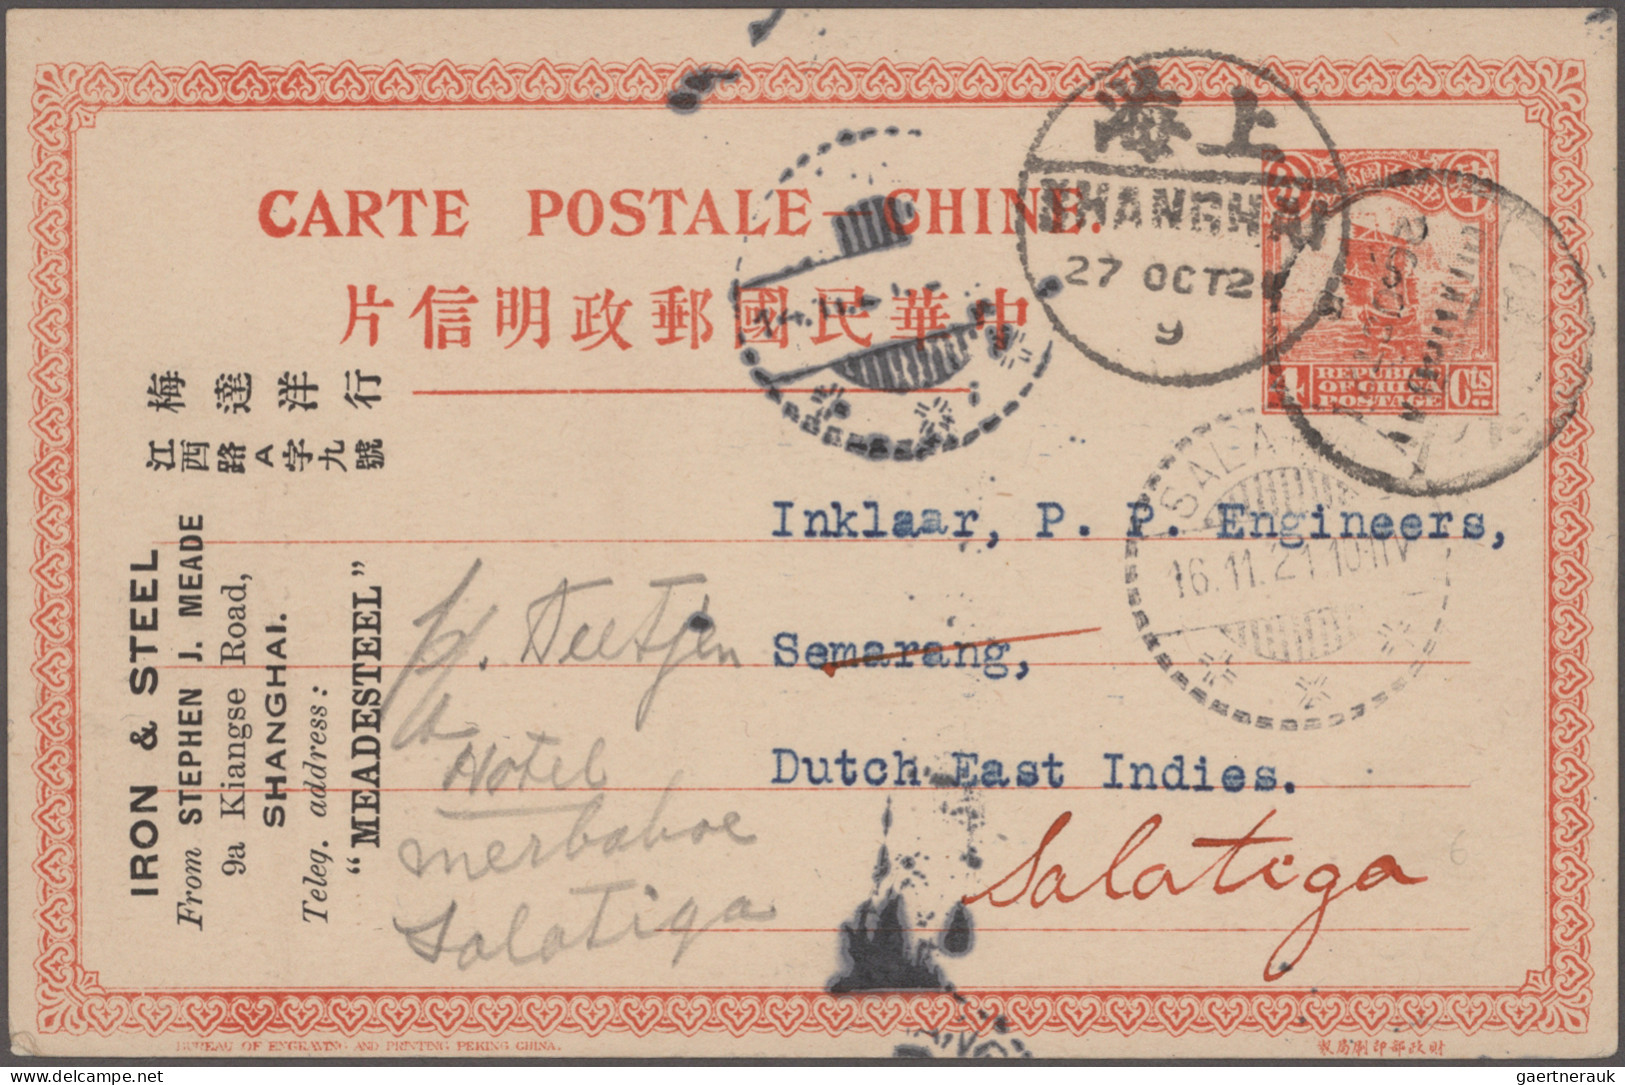 China: 1912/1949, exhibit "Postage Rates of the Republic of China, 1911-1949" mo